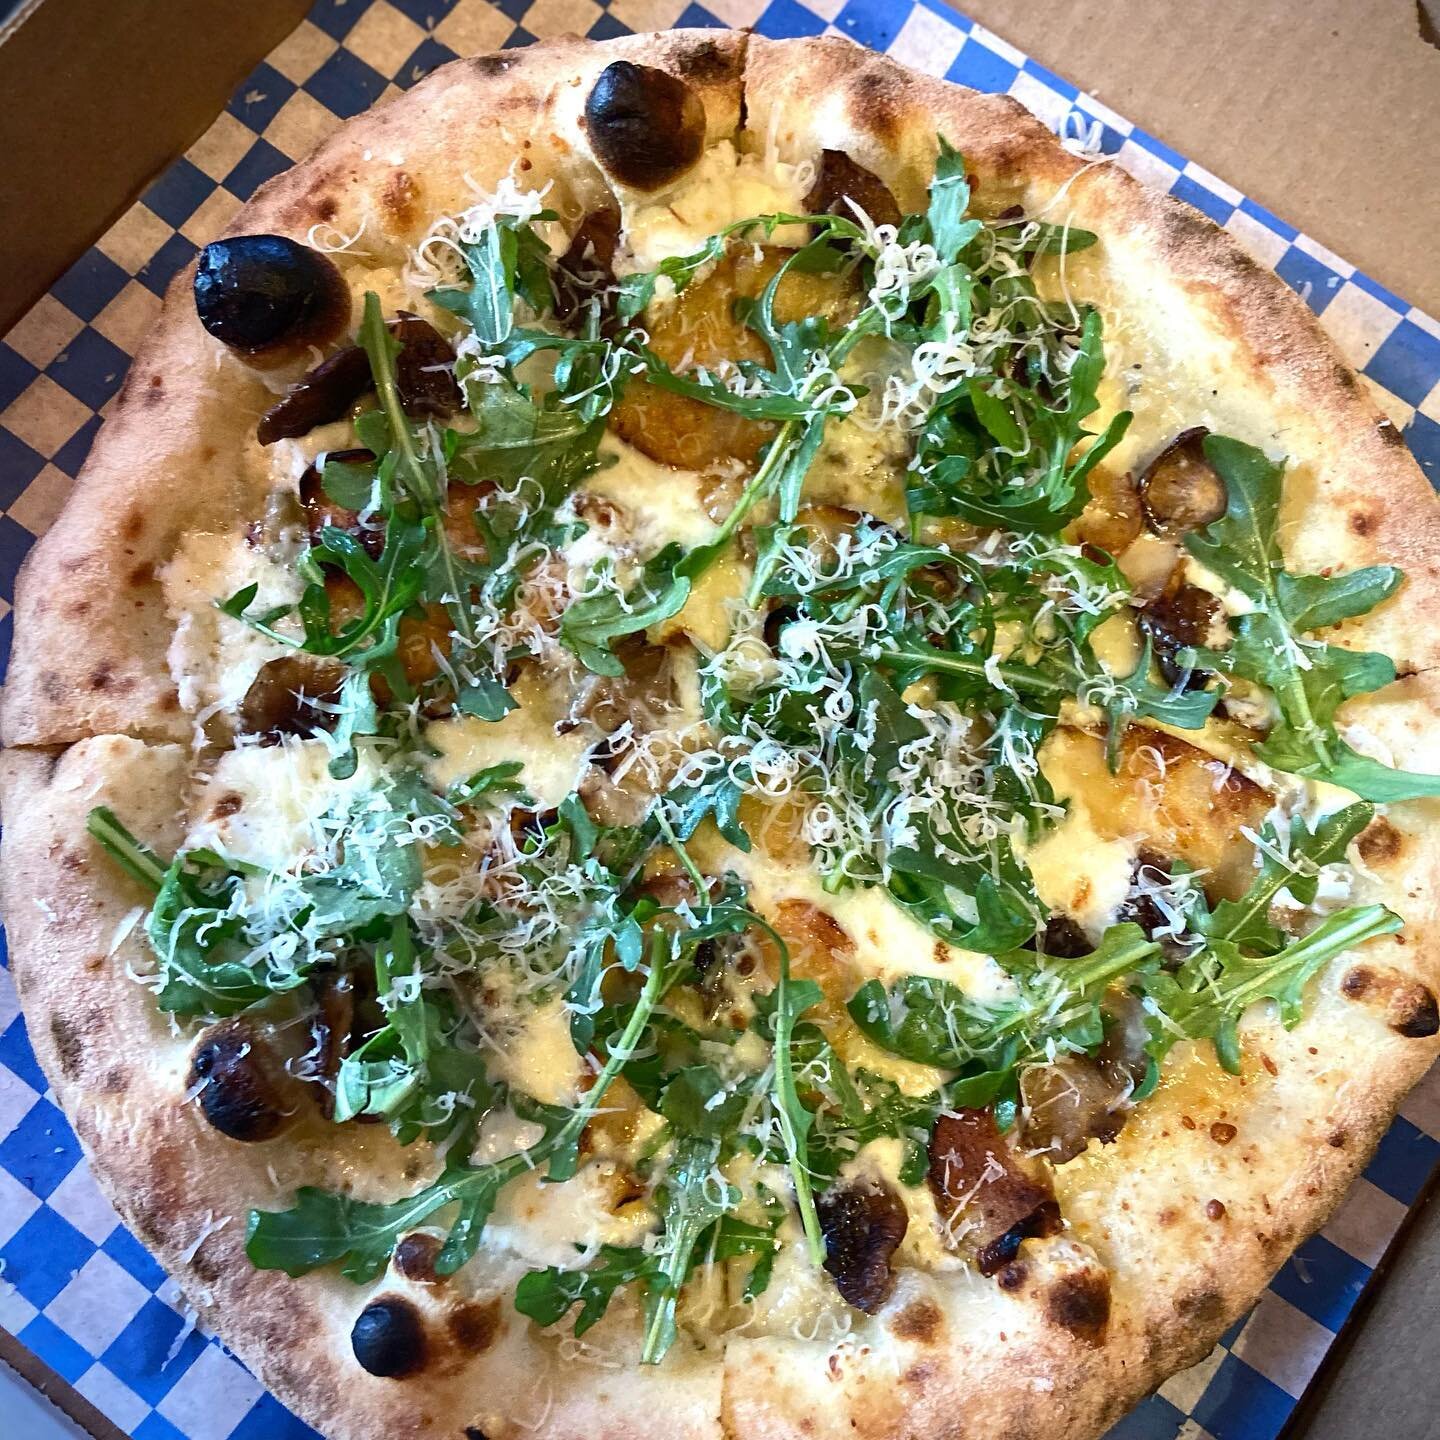 Happy Saturday! We&rsquo;ve had a great and extremely busy week with sell-outs every night! Just a reminder that:

1) Today is the last day of the white balsamic pear and Gorgonzola pizza special! 

2) Peoples are going nuts for @c_akehouse brownies 